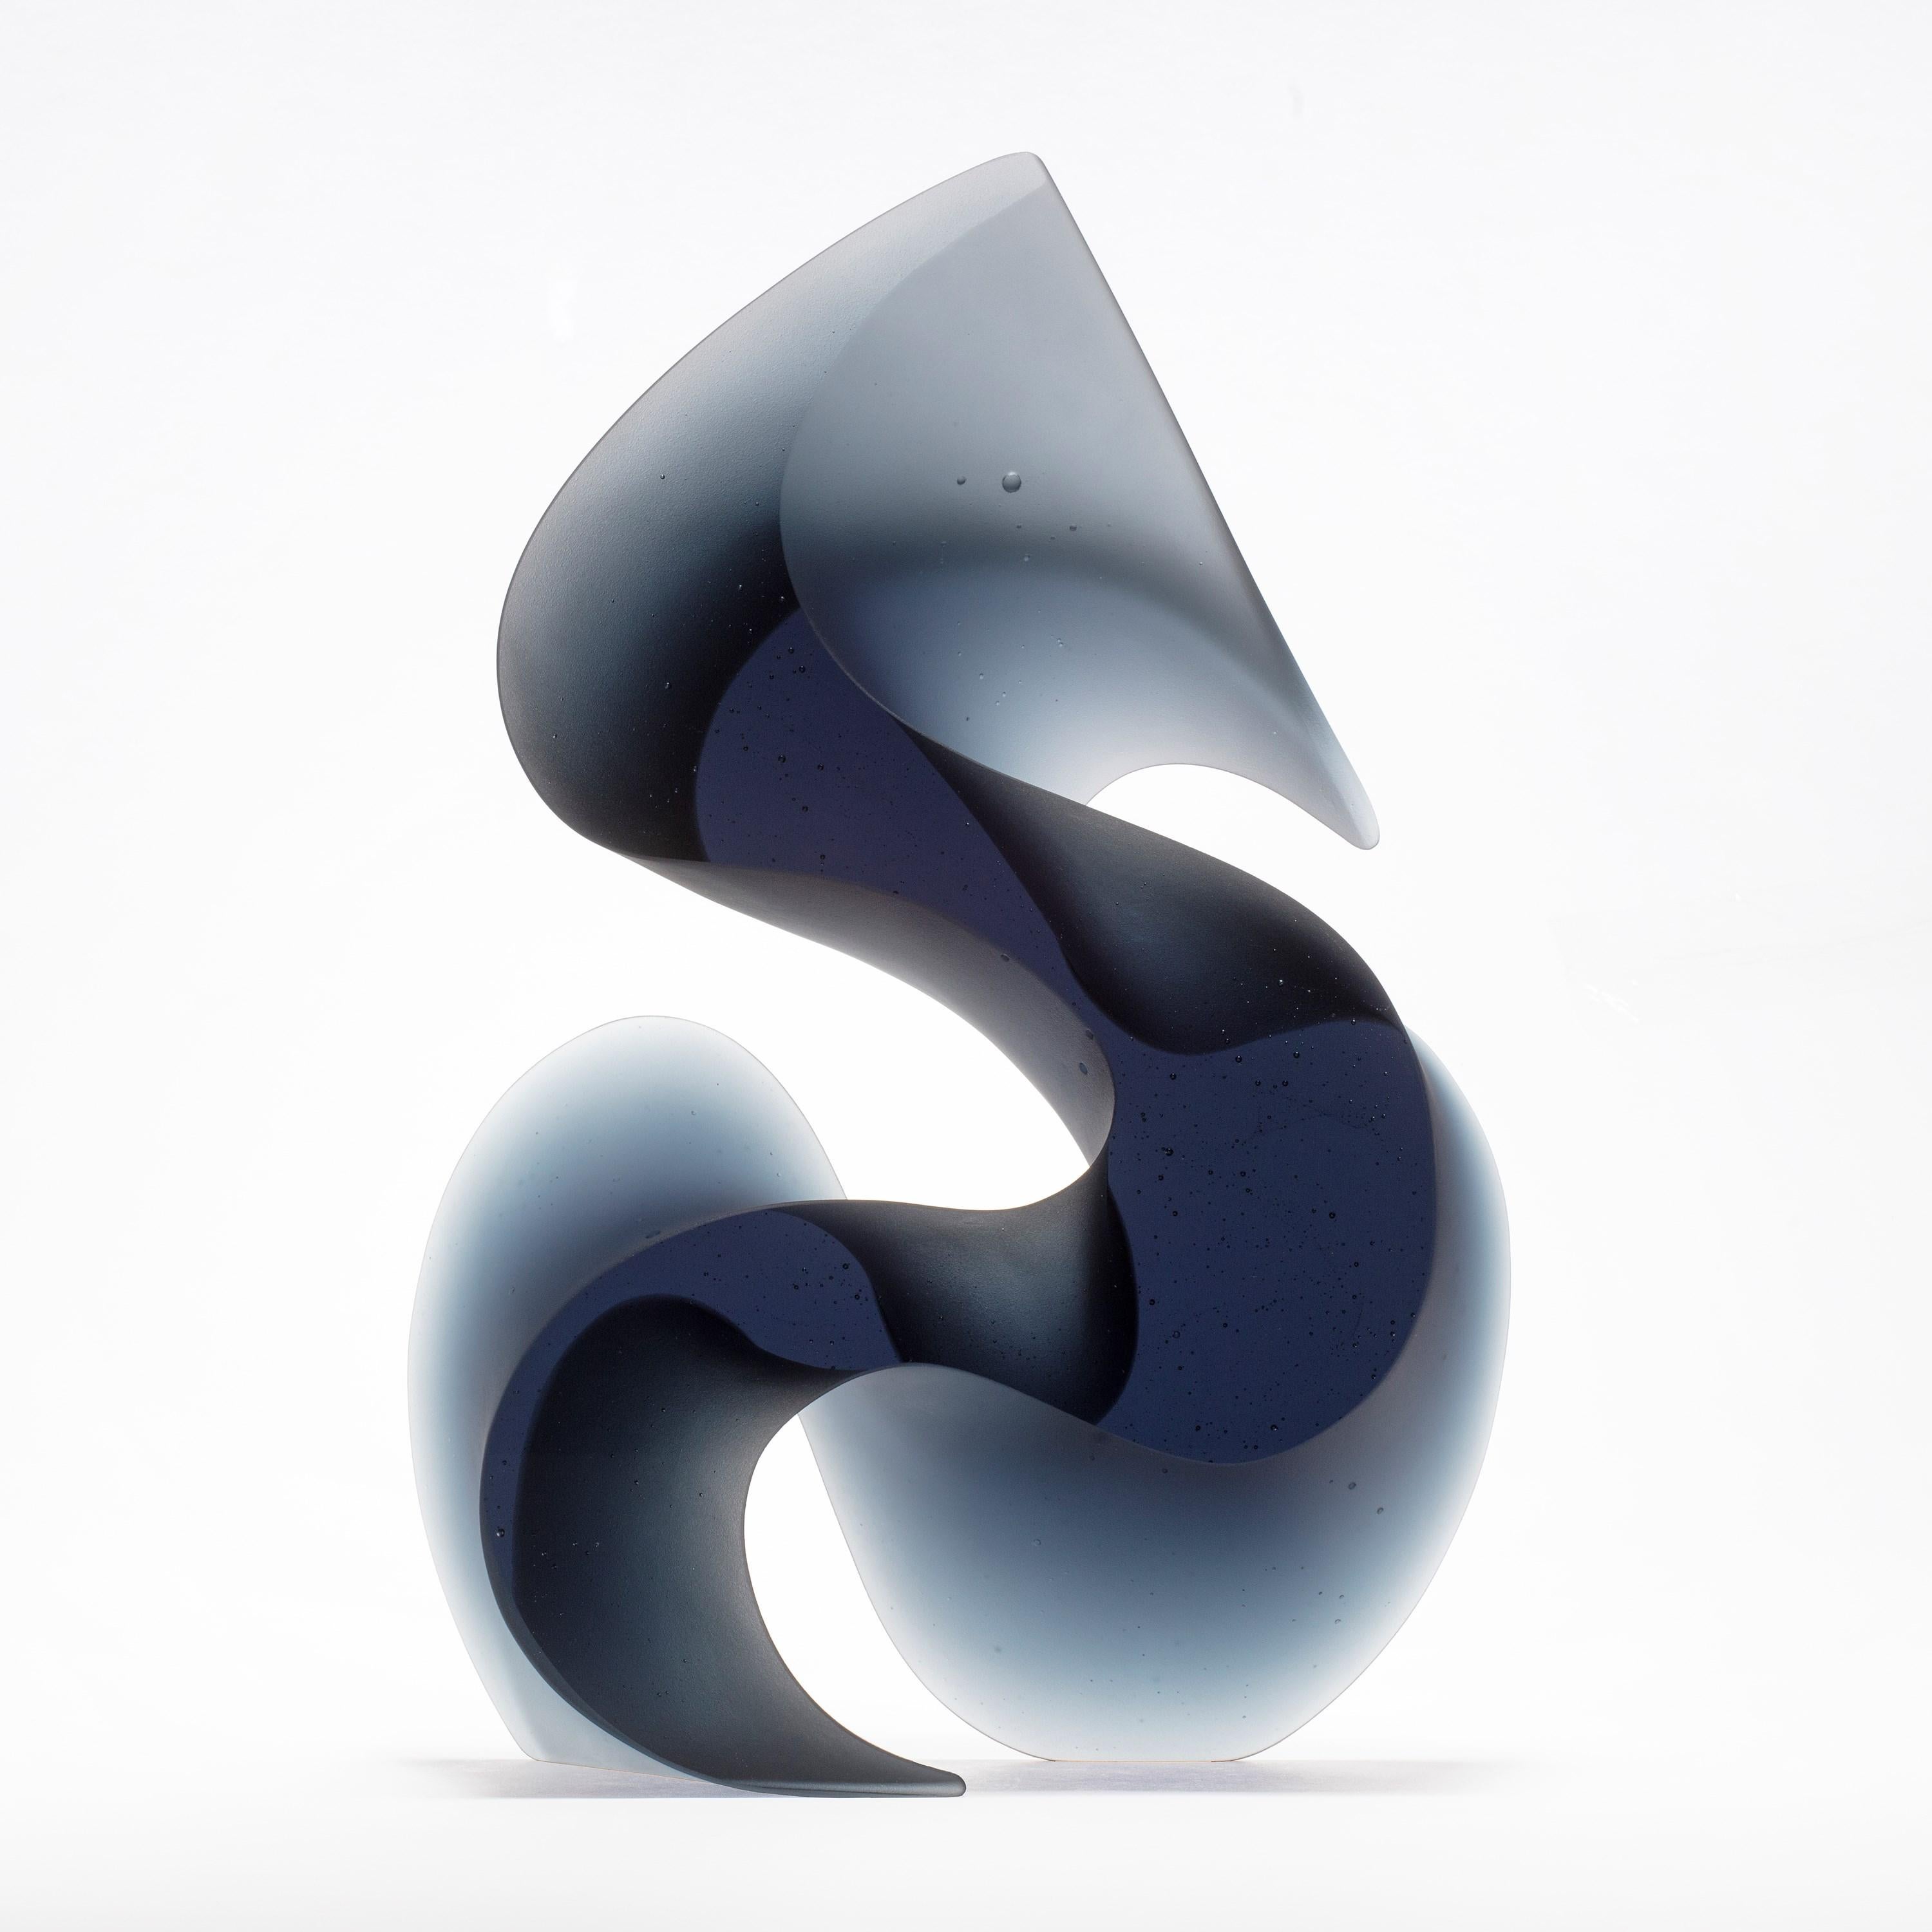 Flow Grey Blue, a Steel Blue Solid Cast Glass Sculpture by Karin Mørch In New Condition For Sale In London, GB